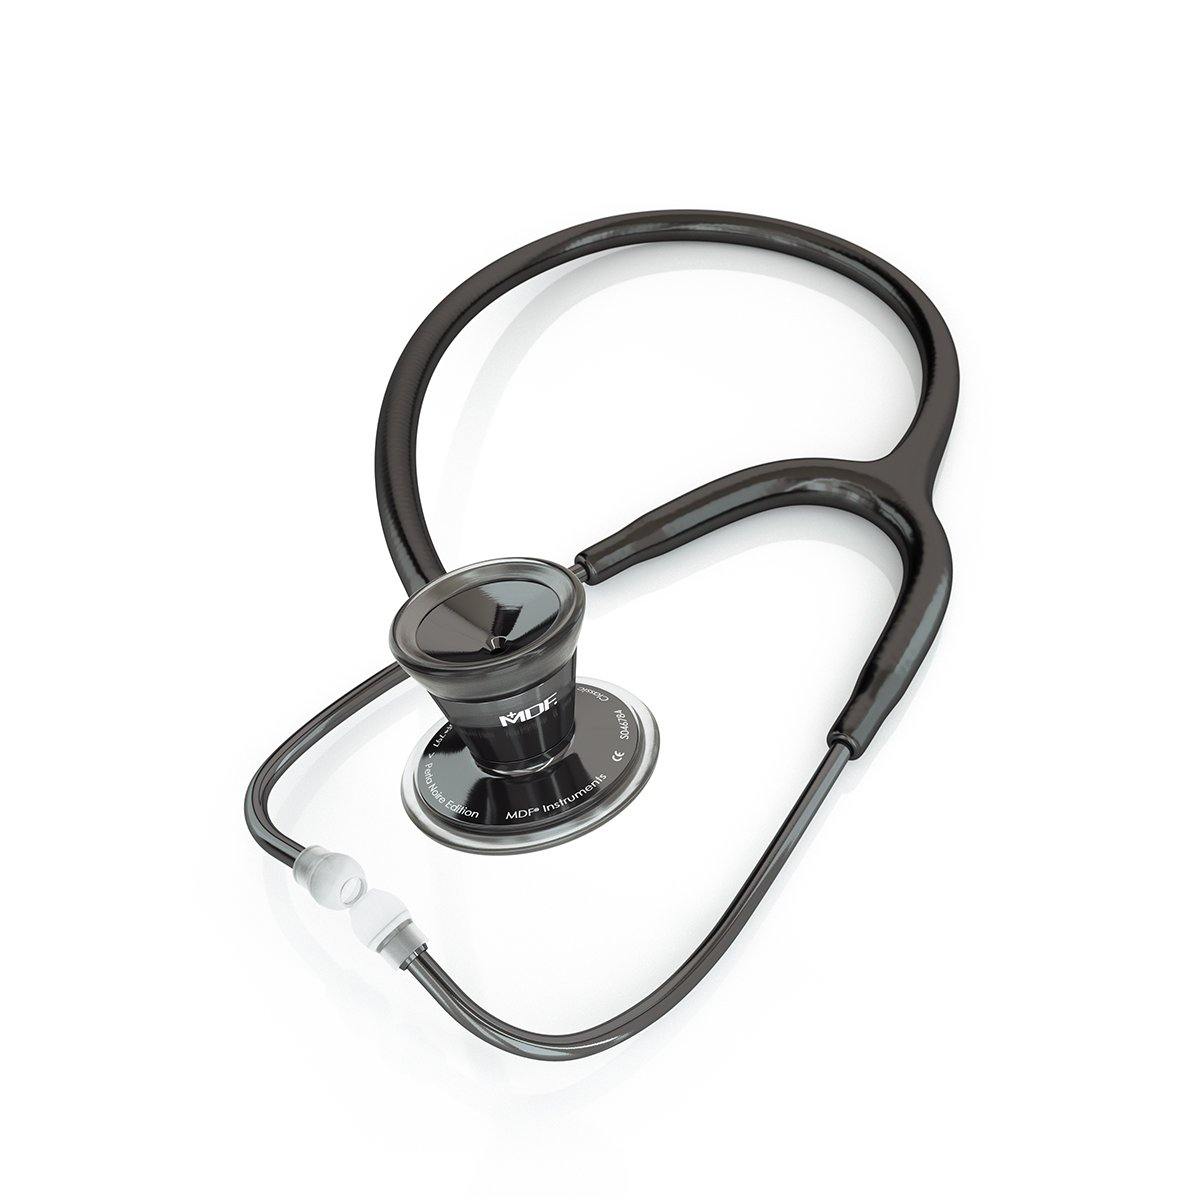 ProCardial® Stainless Steel Cardiology Stethoscope - Black/Perla Noire - MDF Instruments Official Store - Stethoscope